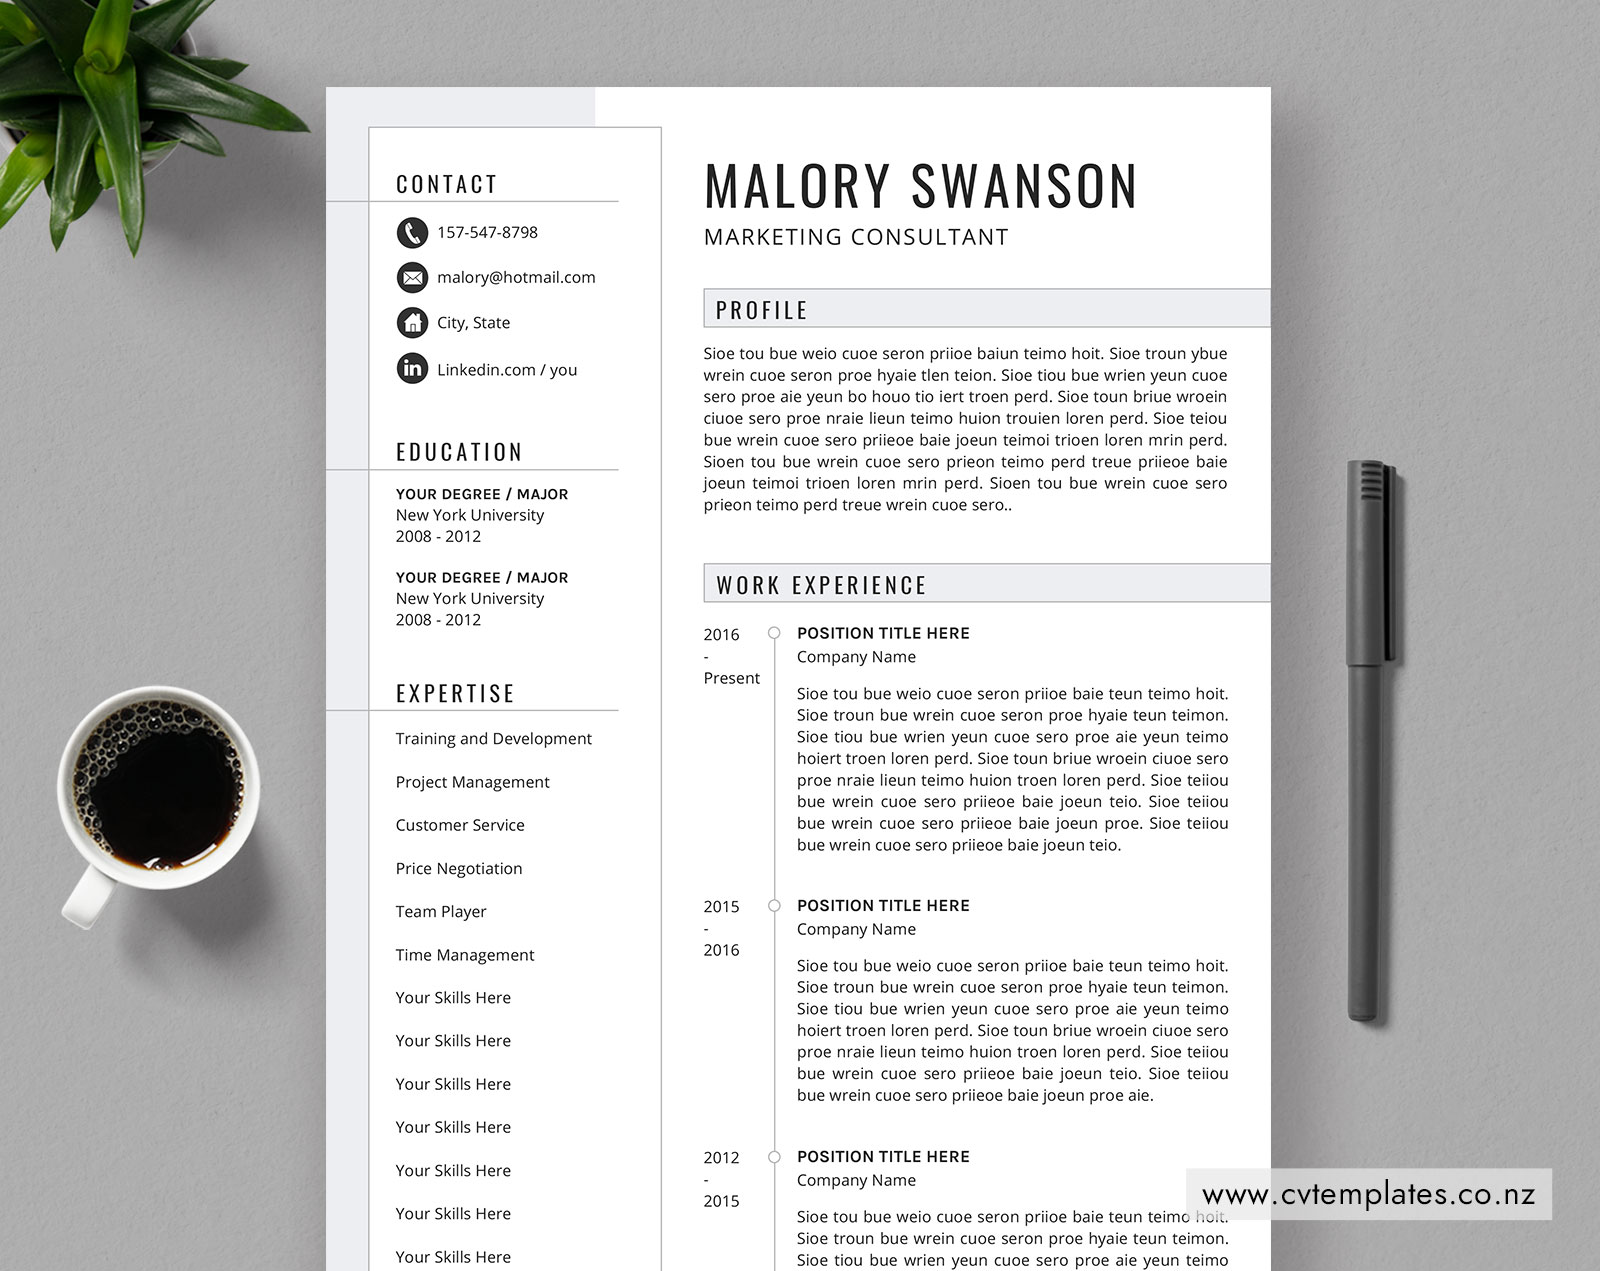 Template Cover Letter For Resume from www.cvtemplates.co.nz